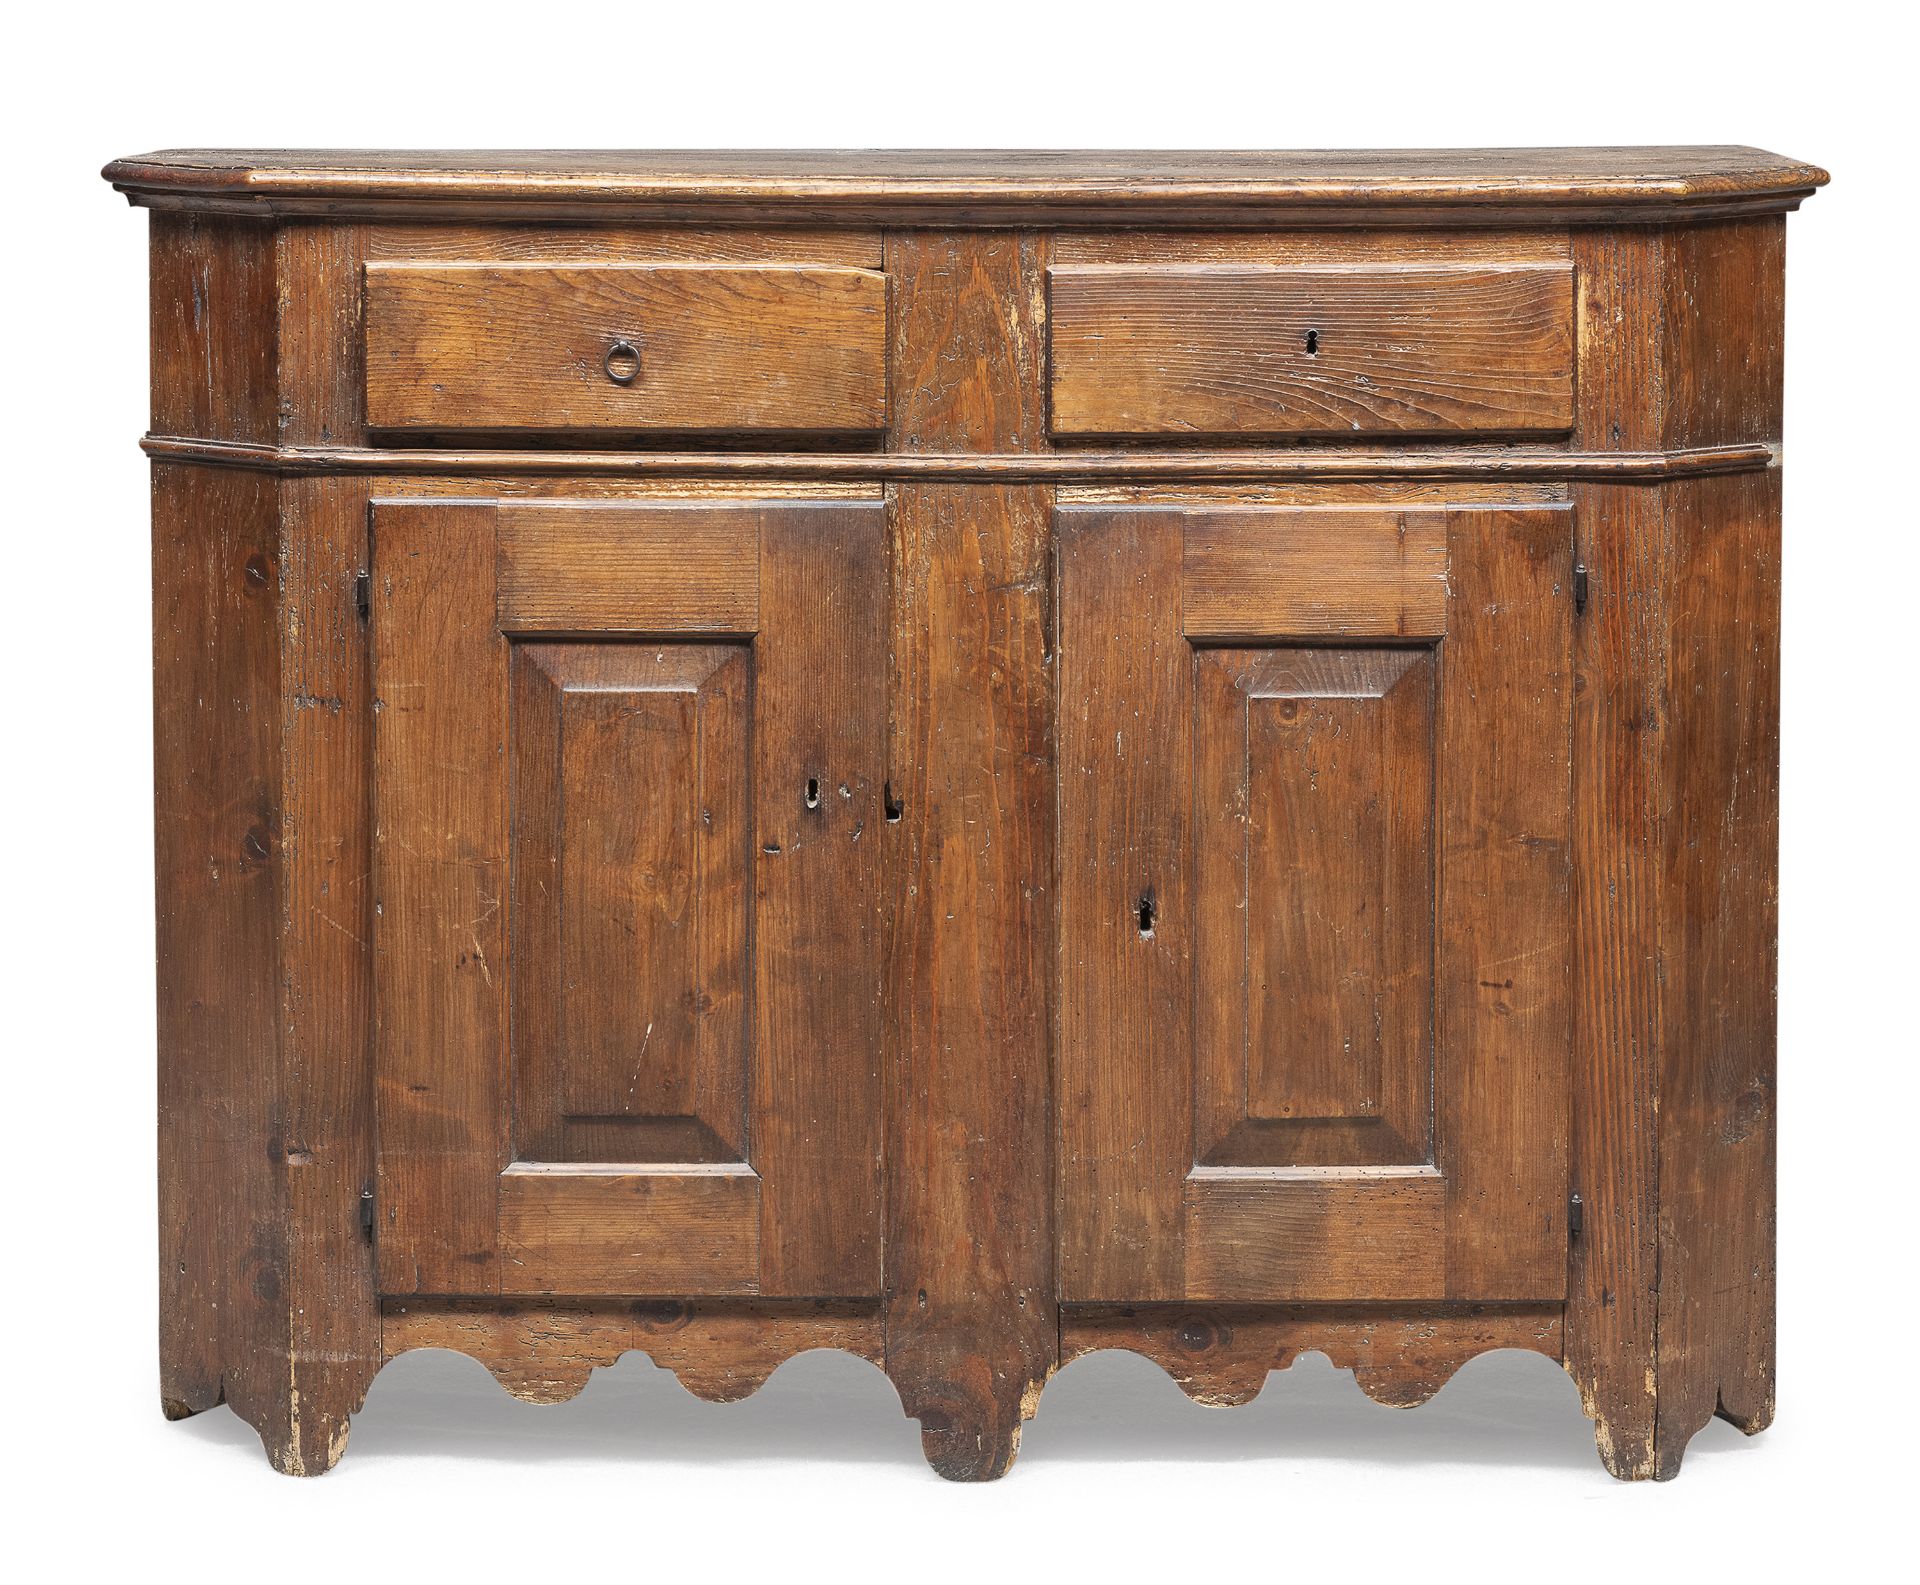 FIR SIDEBOARD NORTHERN ITALY 18th CENTURY